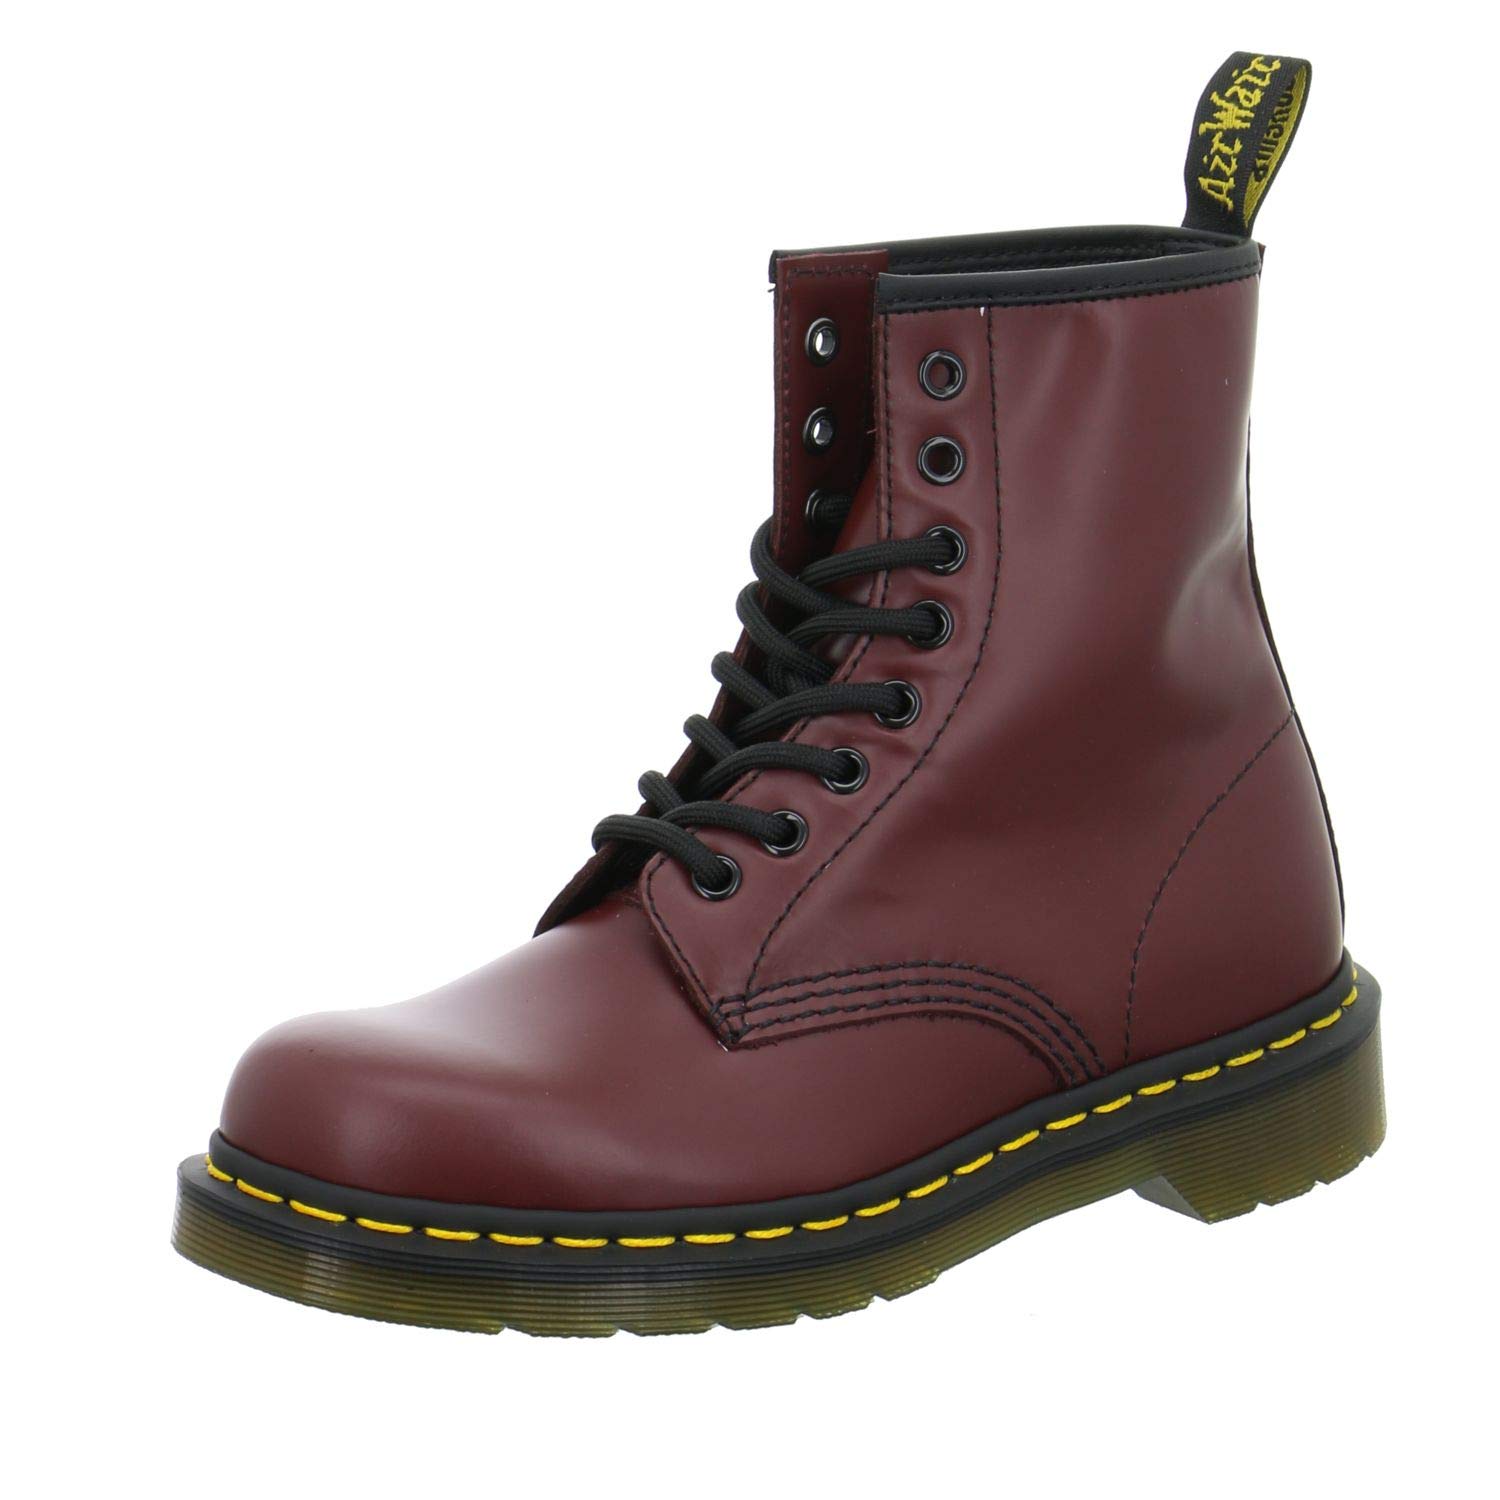 Dr. Martens 1460 Smooth, Unisex-Erwachsene Combat Boots, Rot (1460 Smooth 59 Last CHERRY RED), 36 EU